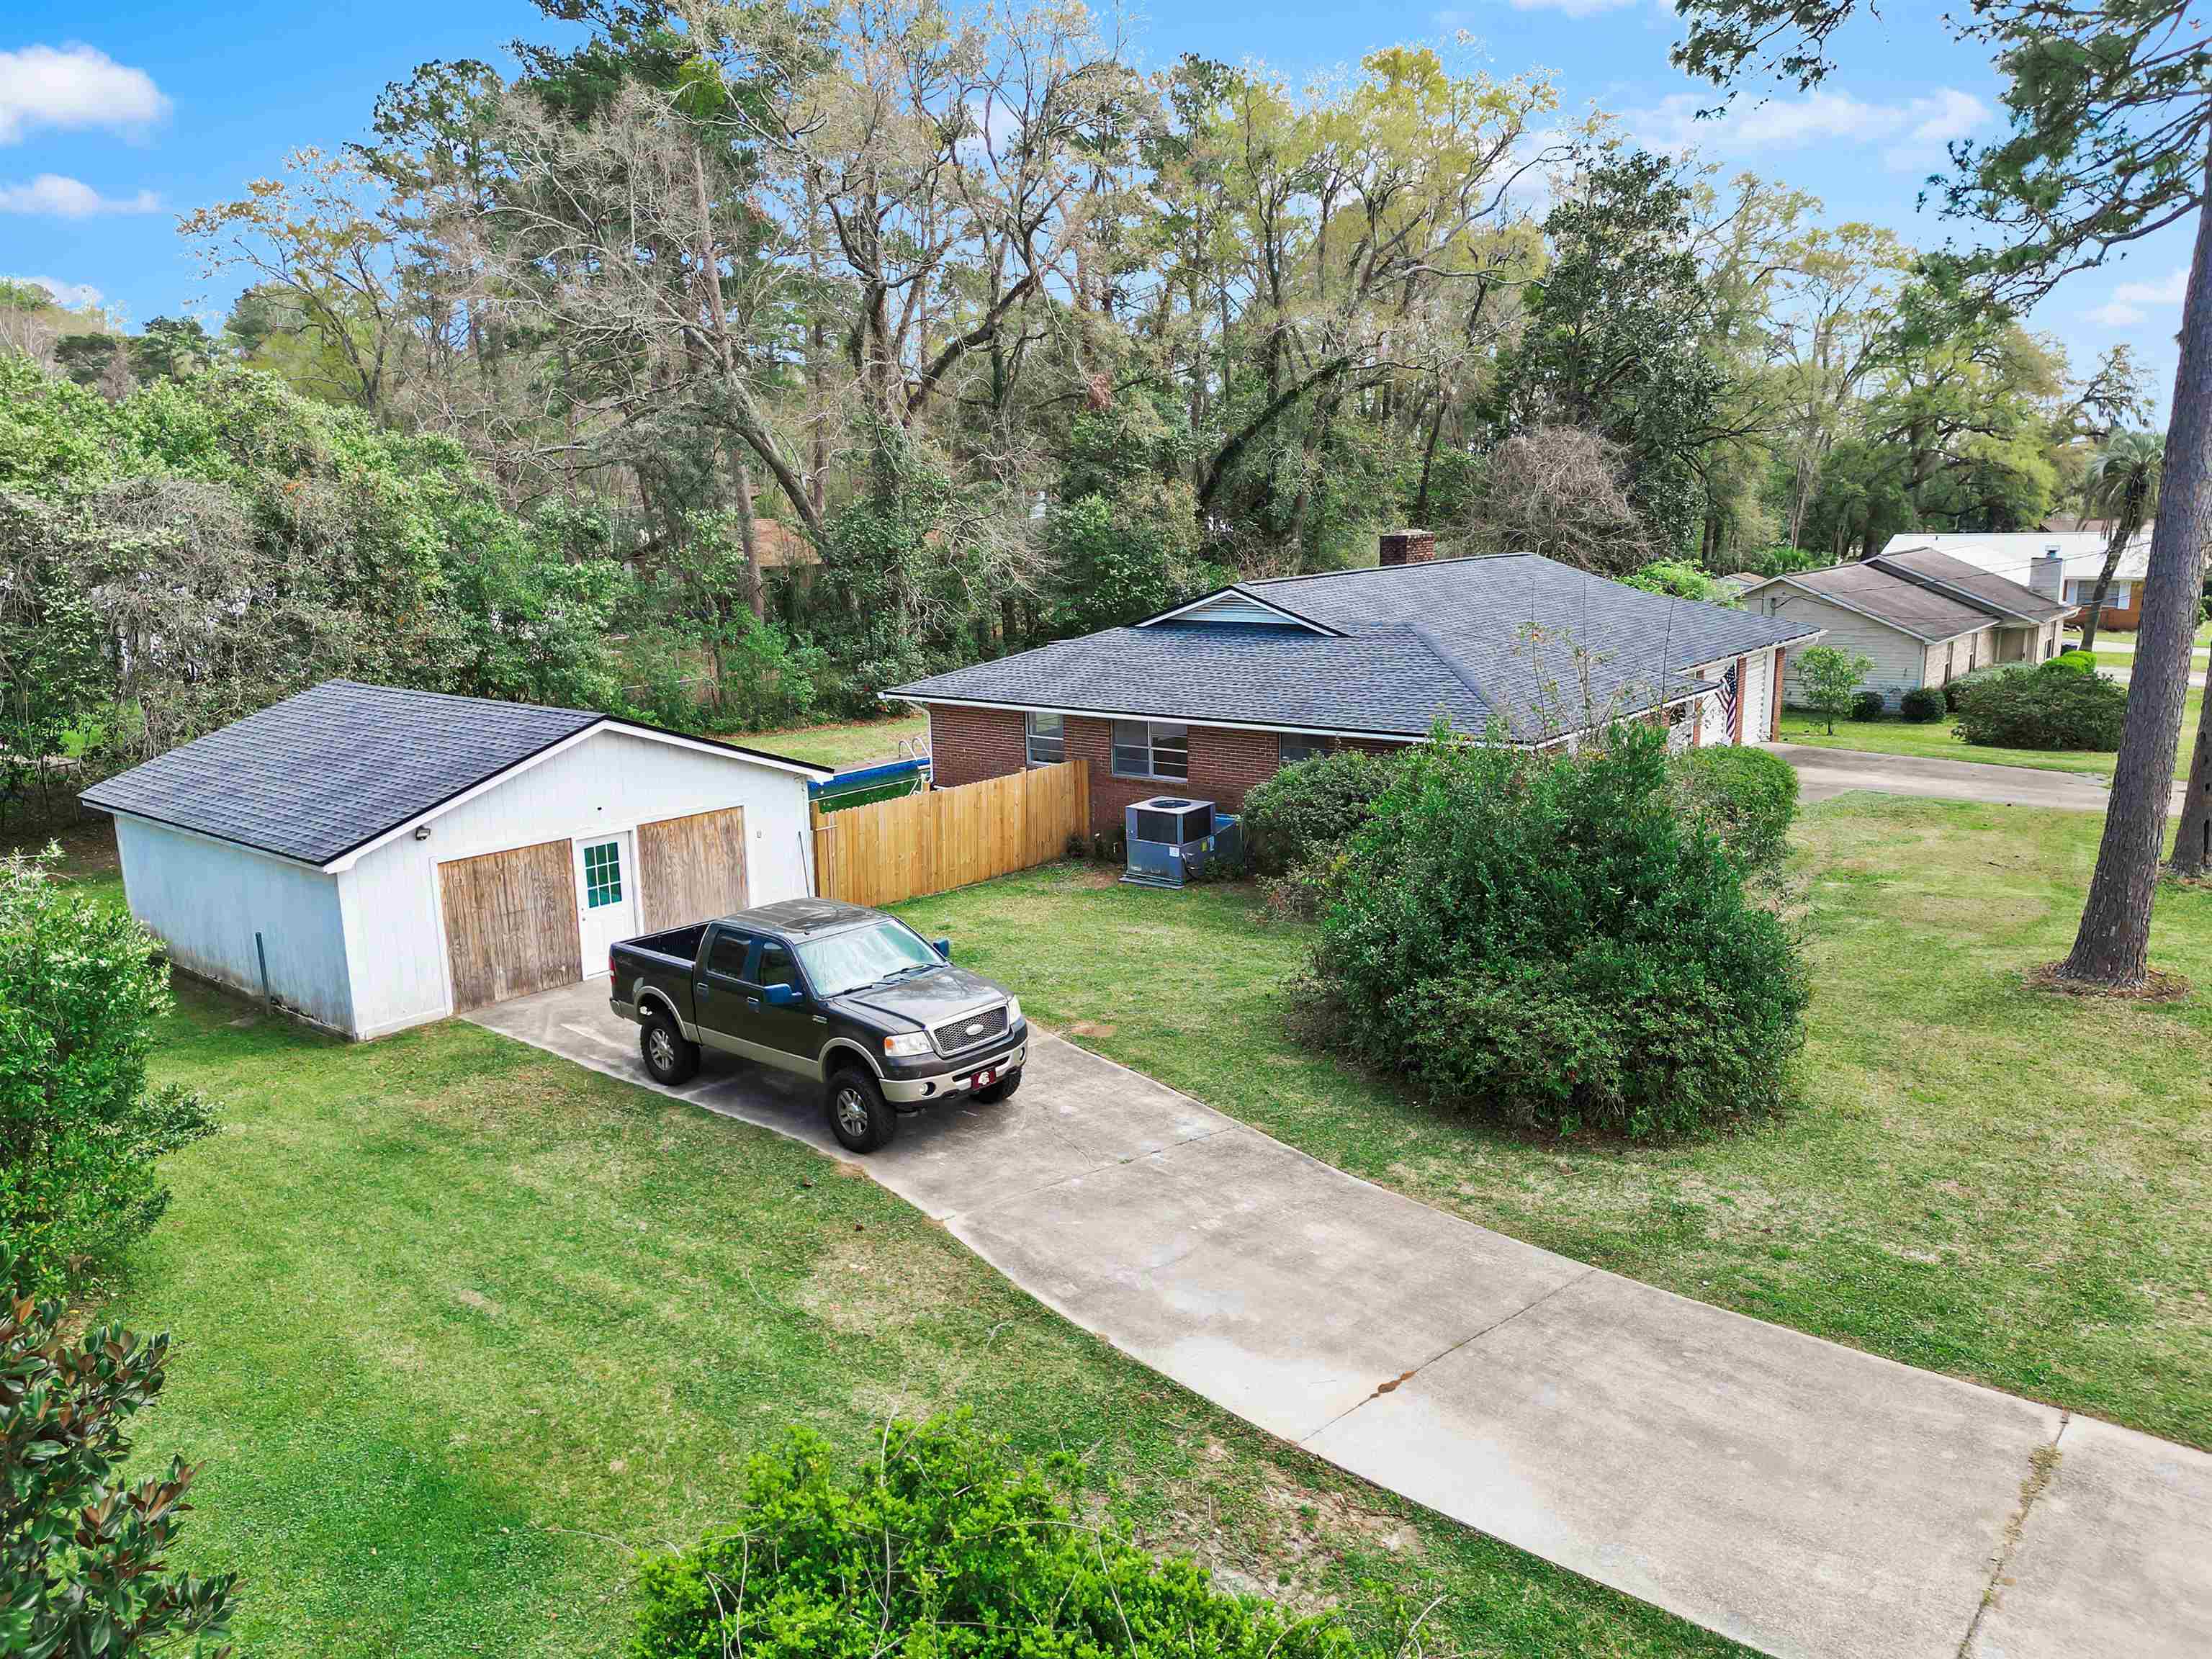 1111 Bonnie Drive,TALLAHASSEE,Florida 32304,3 Bedrooms Bedrooms,2 BathroomsBathrooms,Detached single family,1111 Bonnie Drive,369382